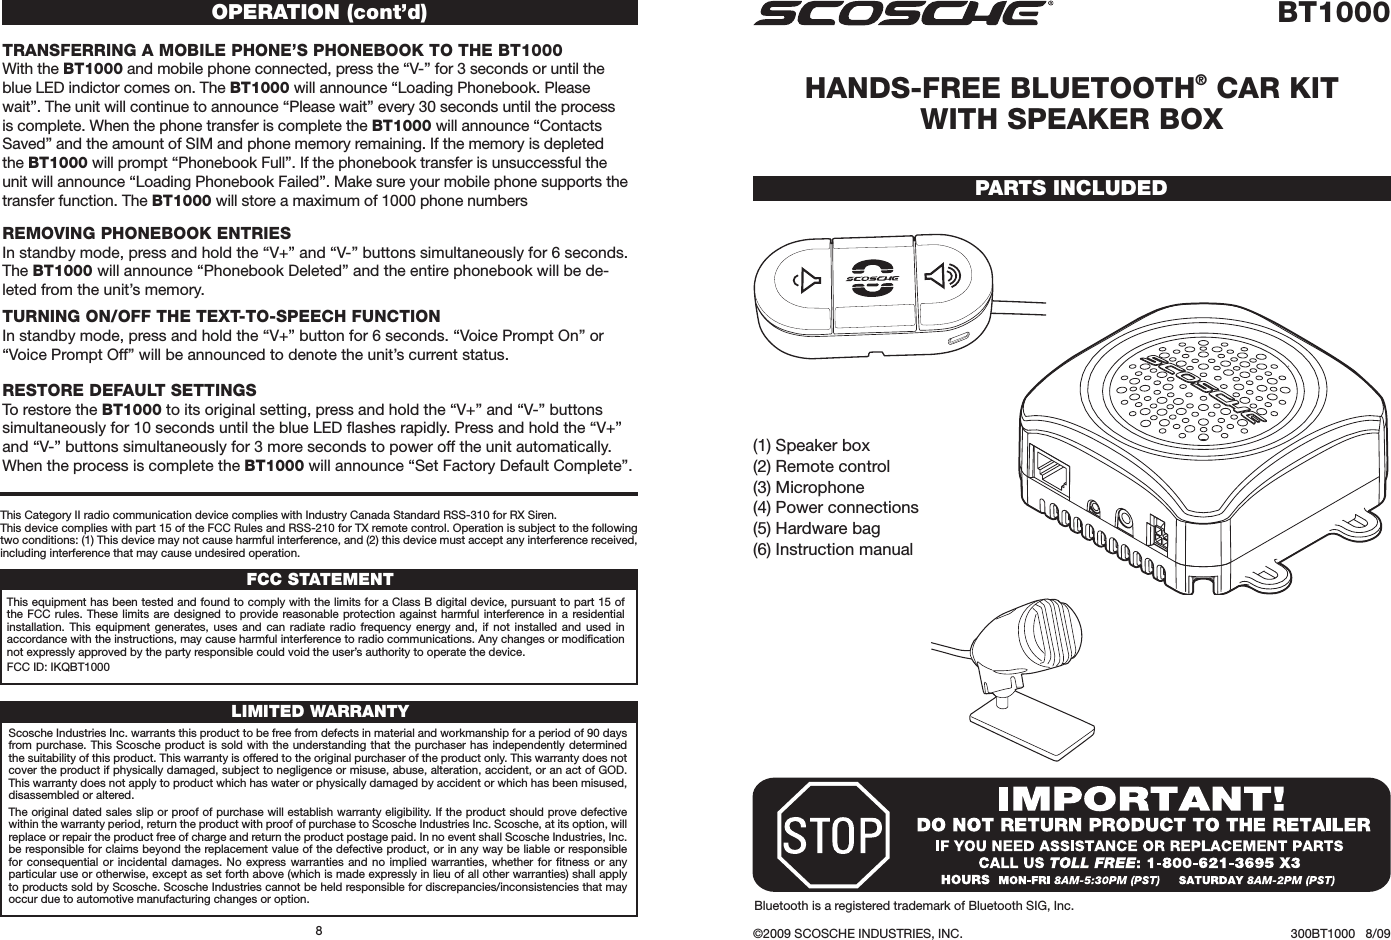 (1) Speaker box(2) Remote control(3) Microphone(4) Power connections(5) Hardware bag(6) Instruction manualBT1000HANDS-FREE BLUETOOTH® CAR KIT  WITH SPEAKER BOX©2009 SCOSCHE INDUSTRIES, INC. 300BT1000   8/09PARTS INCLUDEDTRANSFERRINg A mOBILE PHONE’S PHONEBOOK TO THE BT1000With the BT1000 and mobile phone connected, press the “V-” for 3 seconds or until the blue LED indictor comes on. The BT1000 will announce “Loading Phonebook. Please wait”. The unit will continue to announce “Please wait” every 30 seconds until the process is complete. When the phone transfer is complete the BT1000 will announce “Contacts Saved” and the amount of SIM and phone memory remaining. If the memory is depleted the BT1000 will prompt “Phonebook Full”. If the phonebook transfer is unsuccessful the unit will announce “Loading Phonebook Failed”. Make sure your mobile phone supports the transfer function. The BT1000 will store a maximum of 1000 phone numbers OPERATION (cont’d)REmOVINg PHONEBOOK ENTRIESIn standby mode, press and hold the “V+” and “V-” buttons simultaneously for 6 seconds. The BT1000 will announce “Phonebook Deleted” and the entire phonebook will be de-leted from the unit’s memory. TURNINg ON/OFF THE TEXT-TO-SPEECH FUNCTIONIn standby mode, press and hold the “V+” button for 6 seconds. “Voice Prompt On” or “Voice Prompt Off” will be announced to denote the unit’s current status.RESTORE DEFAULT SETTINgSTo restore the BT1000 to its original setting, press and hold the “V+” and “V-” buttons simultaneously for 10 seconds until the blue LED ﬂashes rapidly. Press and hold the “V+” and “V-” buttons simultaneously for 3 more seconds to power off the unit automatically. When the process is complete the BT1000 will announce “Set Factory Default Complete”.Scosche Industries Inc. warrants this product to be free from defects in material and workmanship for a period of 90 days from purchase. This Scosche product is sold with the understanding that the purchaser has independently determined the suitability of this product. This warranty is offered to the original purchaser of the product only. This warranty does not cover the product if physically damaged, subject to negligence or misuse, abuse, alteration, accident, or an act of GOD. This warranty does not apply to product which has water or physically damaged by accident or which has been misused, disassembled or altered.The original dated sales slip or proof of purchase will establish warranty eligibility. If the product should prove defective within the warranty period, return the product with proof of purchase to Scosche Industries Inc. Scosche, at its option, will replace or repair the product free of charge and return the product postage paid. In no event shall Scosche Industries, Inc. be responsible for claims beyond the replacement value of the defective product, or in any way be liable or responsible for consequential or incidental  damages.  No  express  warranties  and  no  implied warranties, whether for ﬁtness or  any particular use or otherwise, except as set forth above (which is made expressly in lieu of all other warranties) shall apply to products sold by Scosche. Scosche Industries cannot be held responsible for discrepancies/inconsistencies that may occur due to automotive manufacturing changes or option.LIMITED WARRANTYFCC STATEMENTThis equipment has been tested and found to comply with the limits for a Class B digital device, pursuant to part 15 of the FCC  rules. These limits  are designed  to  provide reasonable protection against harmful interference in a  residential installation.  This  equipment  generates,  uses  and  can  radiate  radio  frequency energy and,  if  not  installed  and  used  in accordance with the instructions, may cause harmful interference to radio communications. Any changes or modiﬁcation not expressly approved by the party responsible could void the user’s authority to operate the device.FCC ID: IKQBT1000This Category II radio communication device complies with Industry Canada Standard RSS-310 for RX Siren.This device complies with part 15 of the FCC Rules and RSS-210 for TX remote control. Operation is subject to the following two conditions: (1) This device may not cause harmful interference, and (2) this device must accept any interference received, including interference that may cause undesired operation.8Bluetooth is a registered trademark of Bluetooth SIG, Inc.